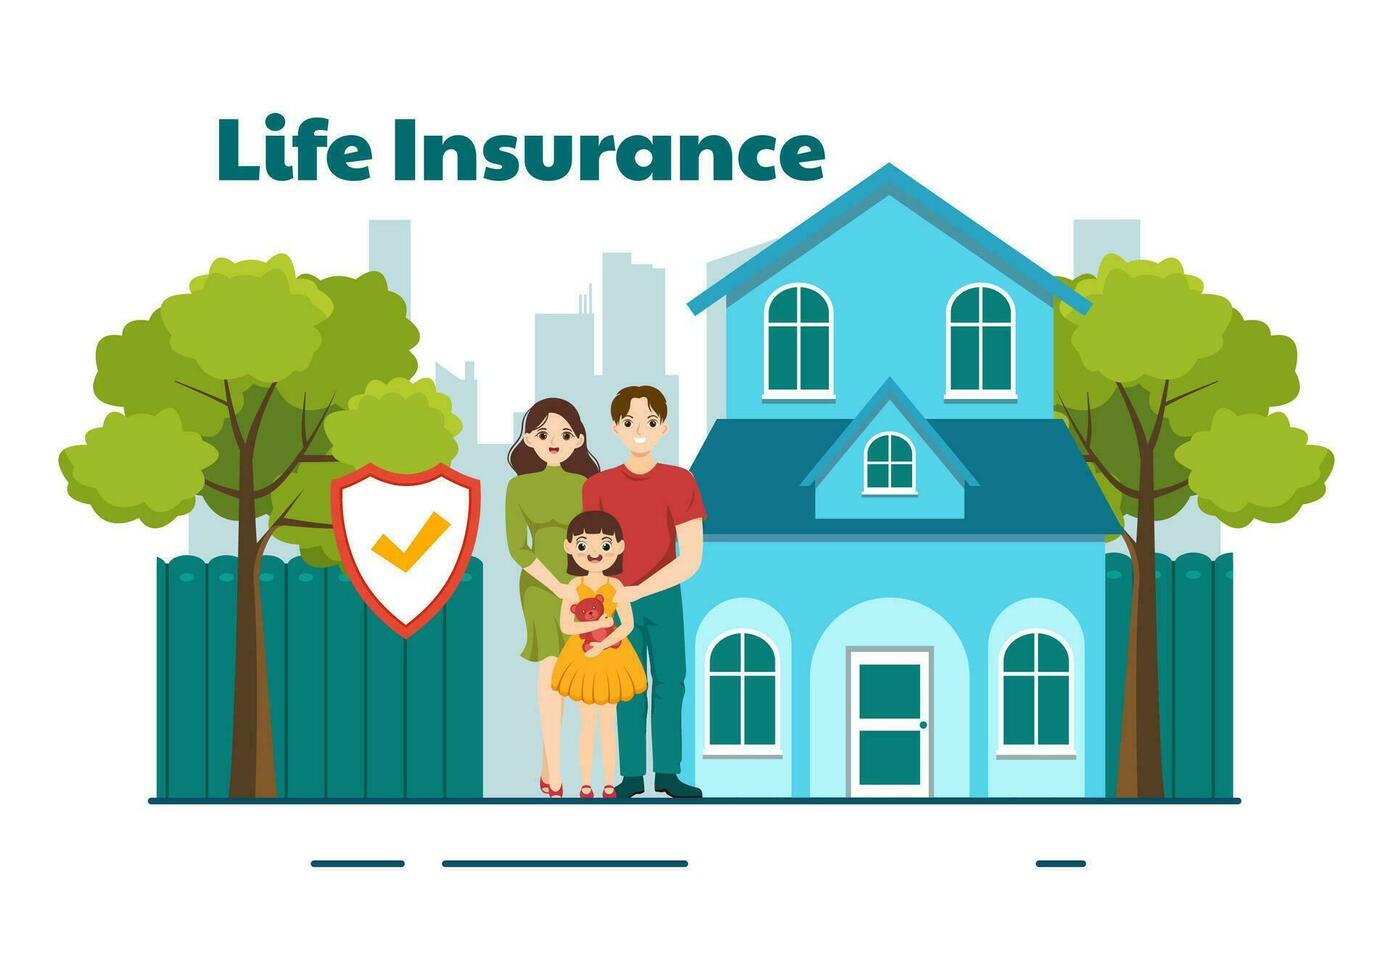 Life Insurance Vector Illustration with Check Marks, Shield and Umbrella for Family Healthcare Protection and Medical Service in Flat Background